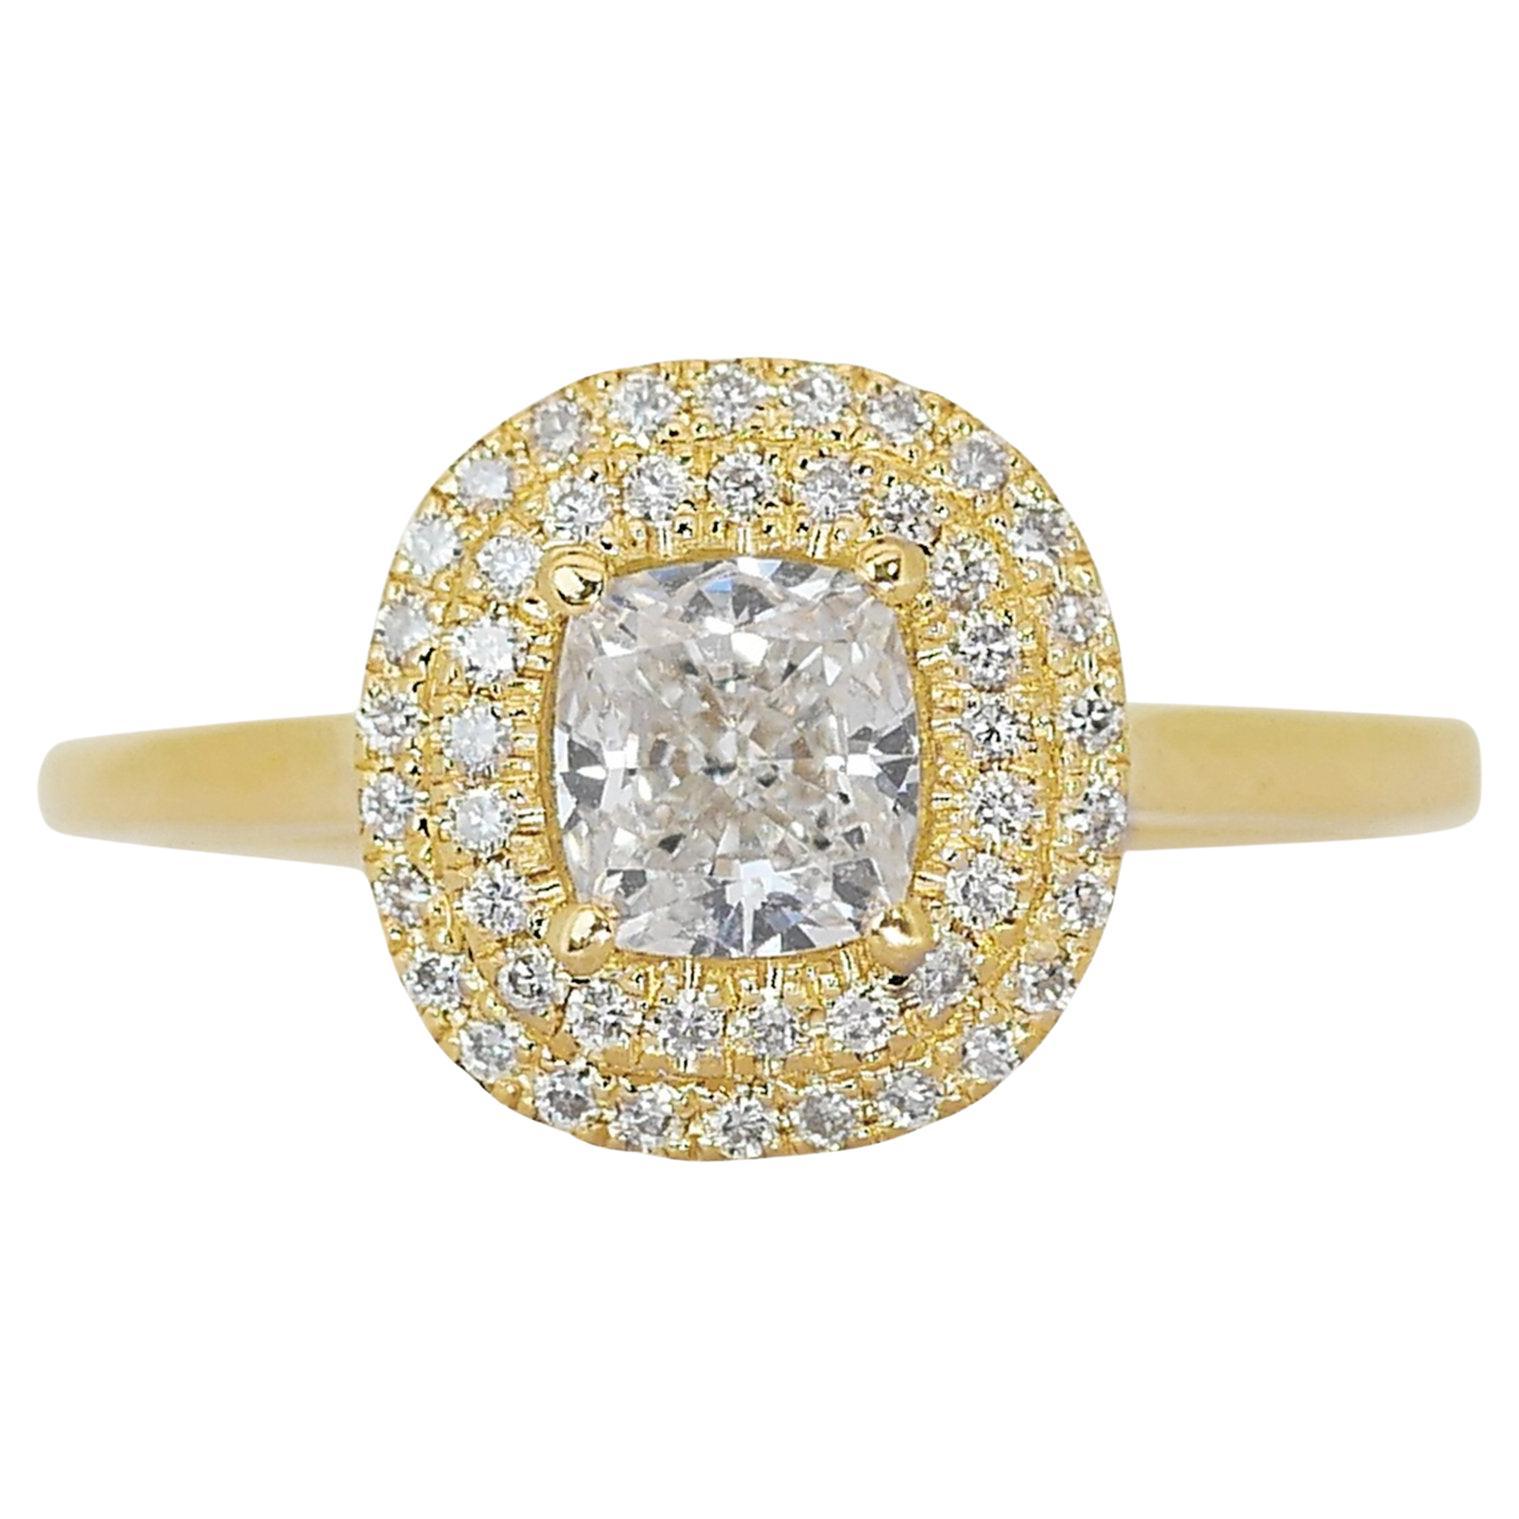 Magnificent 1.22ct Diamond Double Halo Ring in 18k Yellow Gold - GIA Certified For Sale